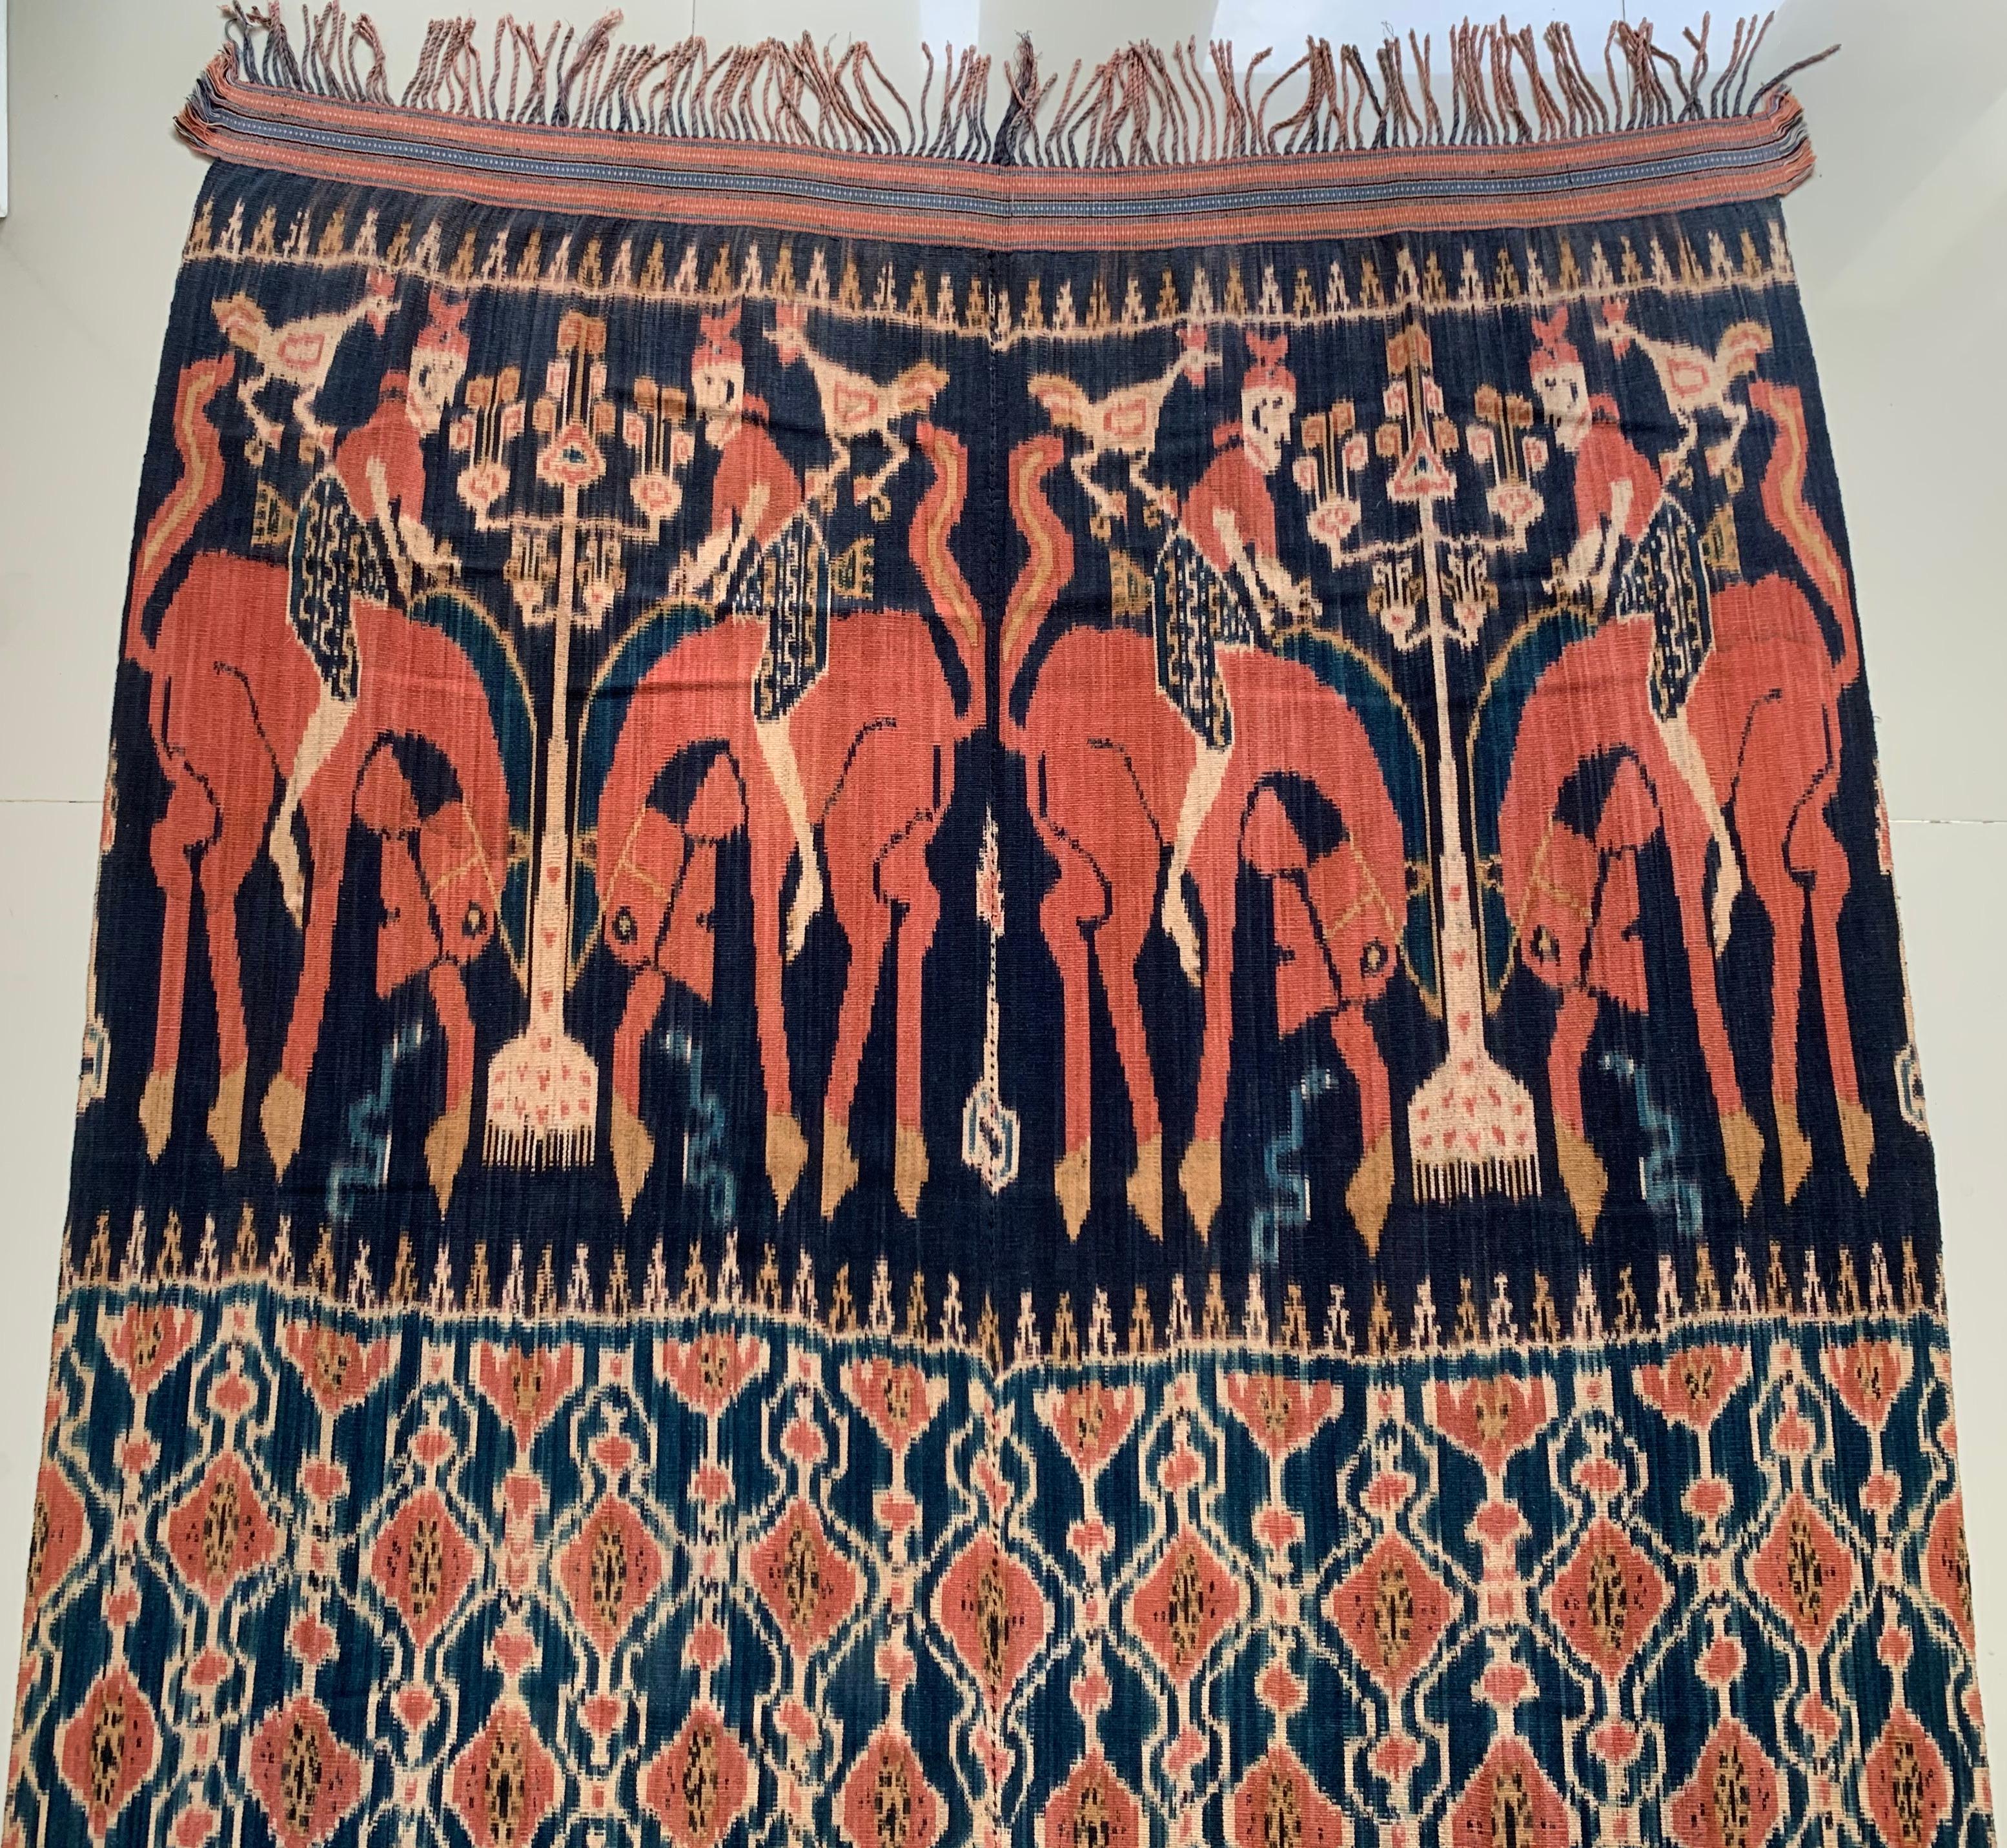 Indonesian Very Large Ikat Textile from Sumba Island with Stunning Tribal Motifs, Indonesia